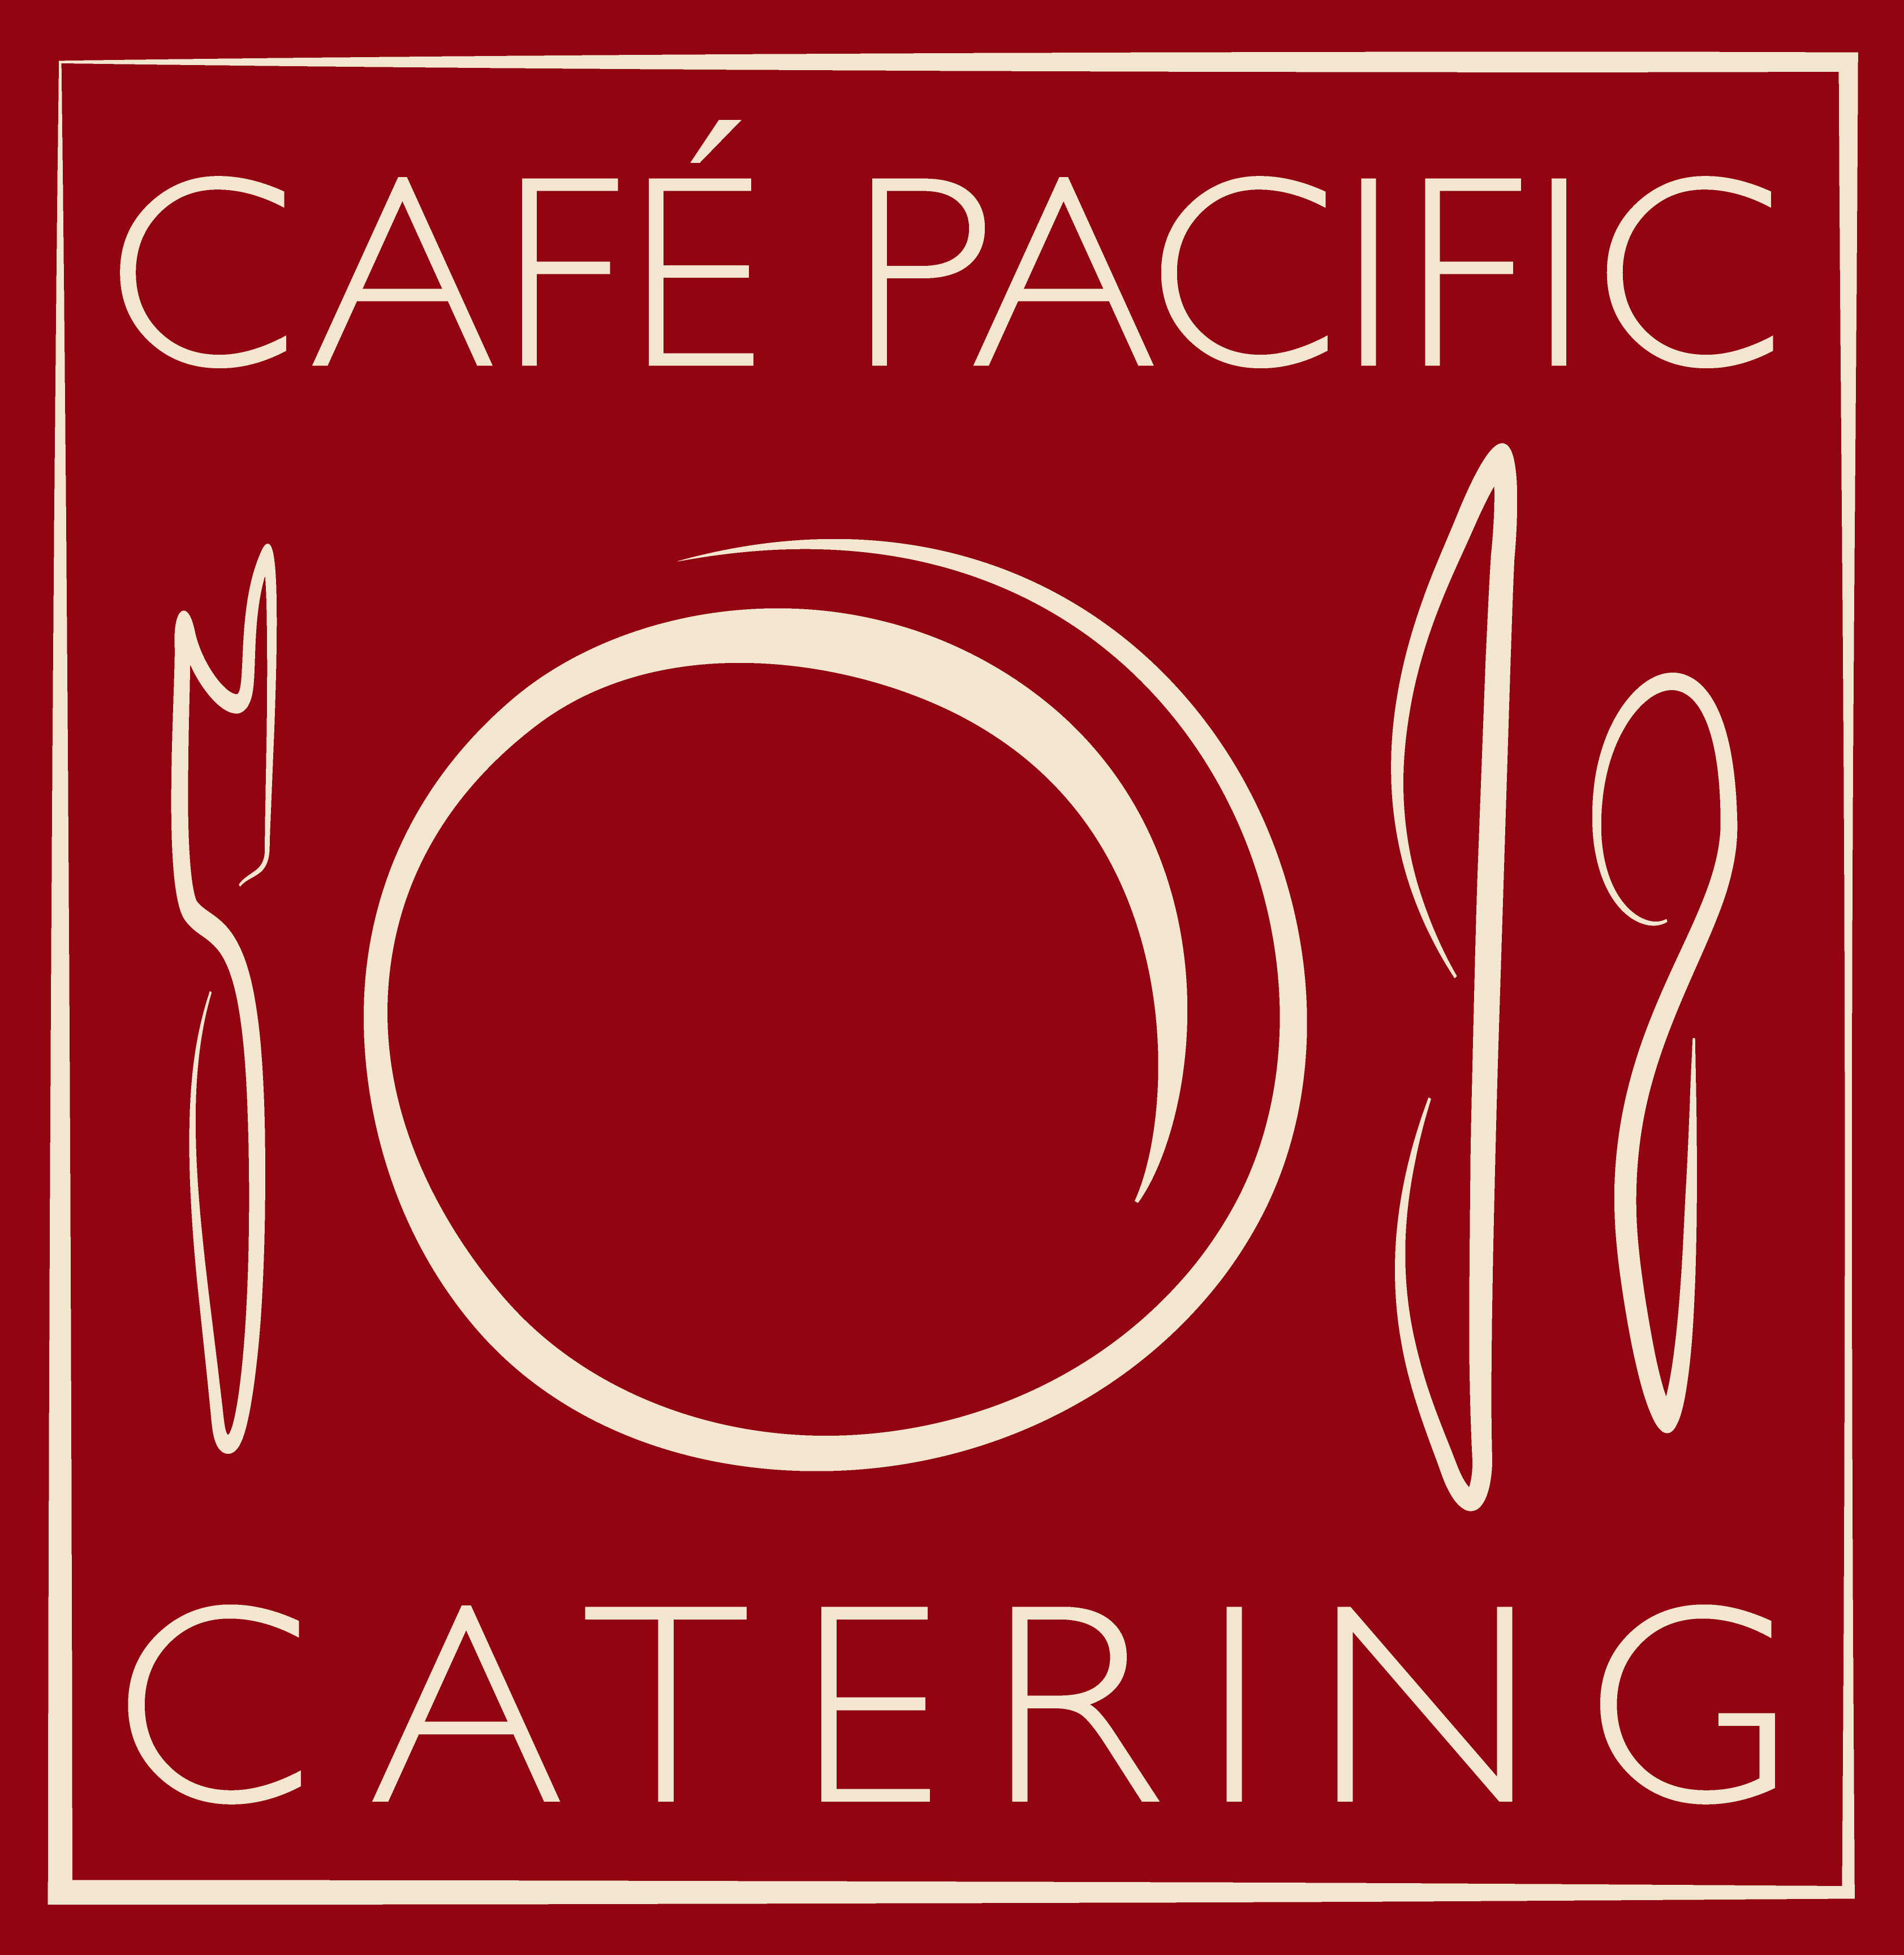 Cafe Pacific Catering